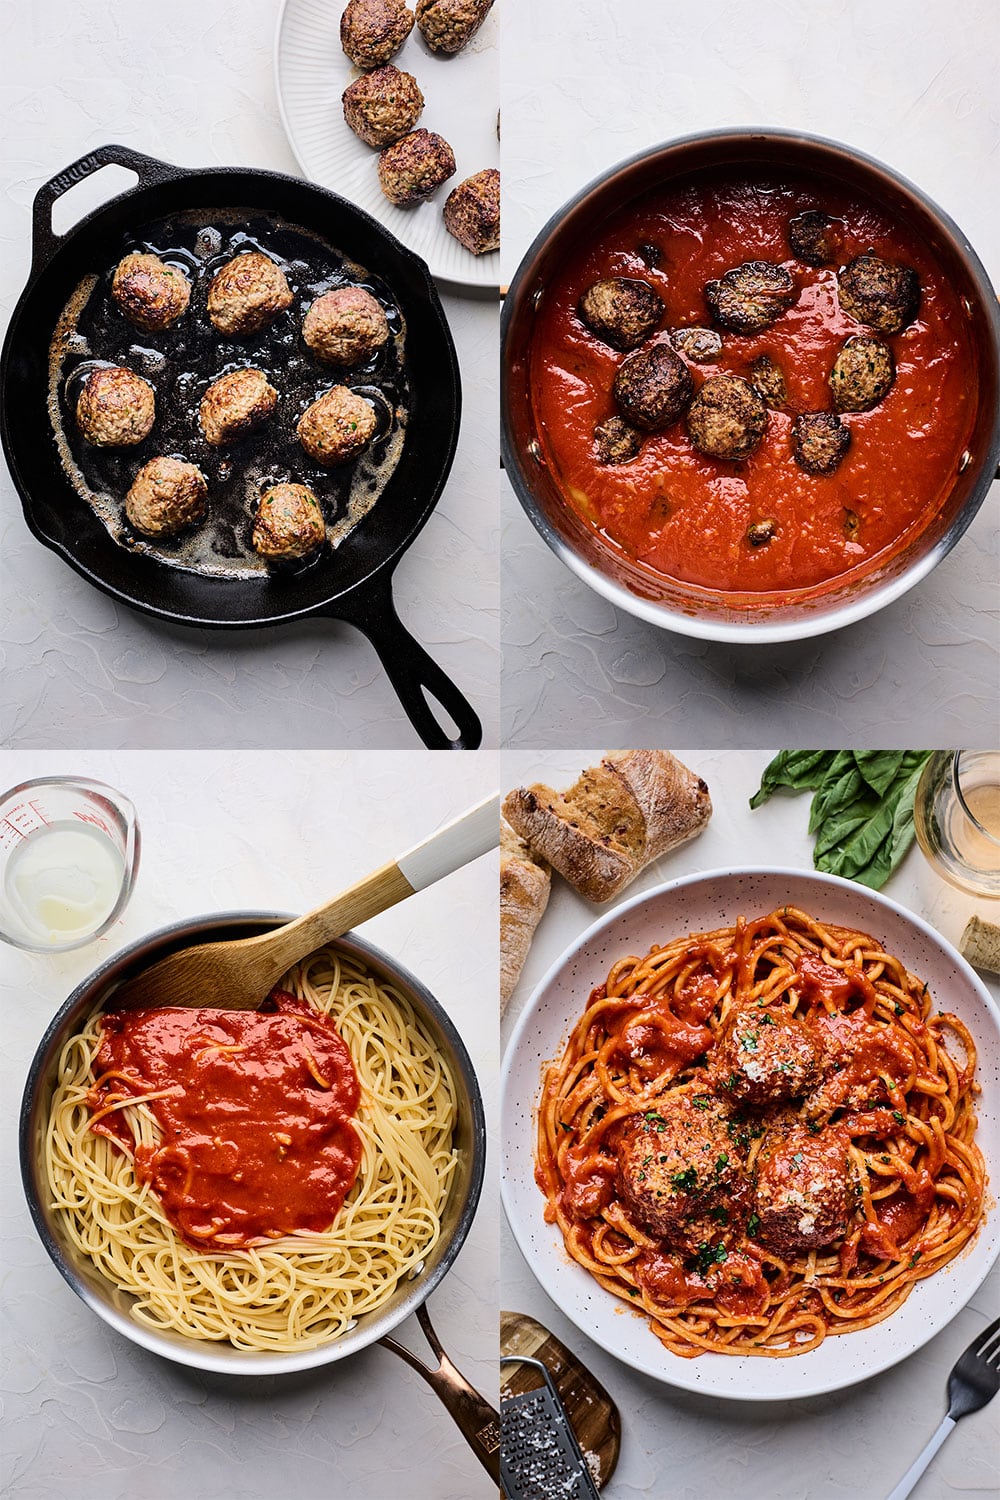 Spaghetti Meatballs step by step process part 2